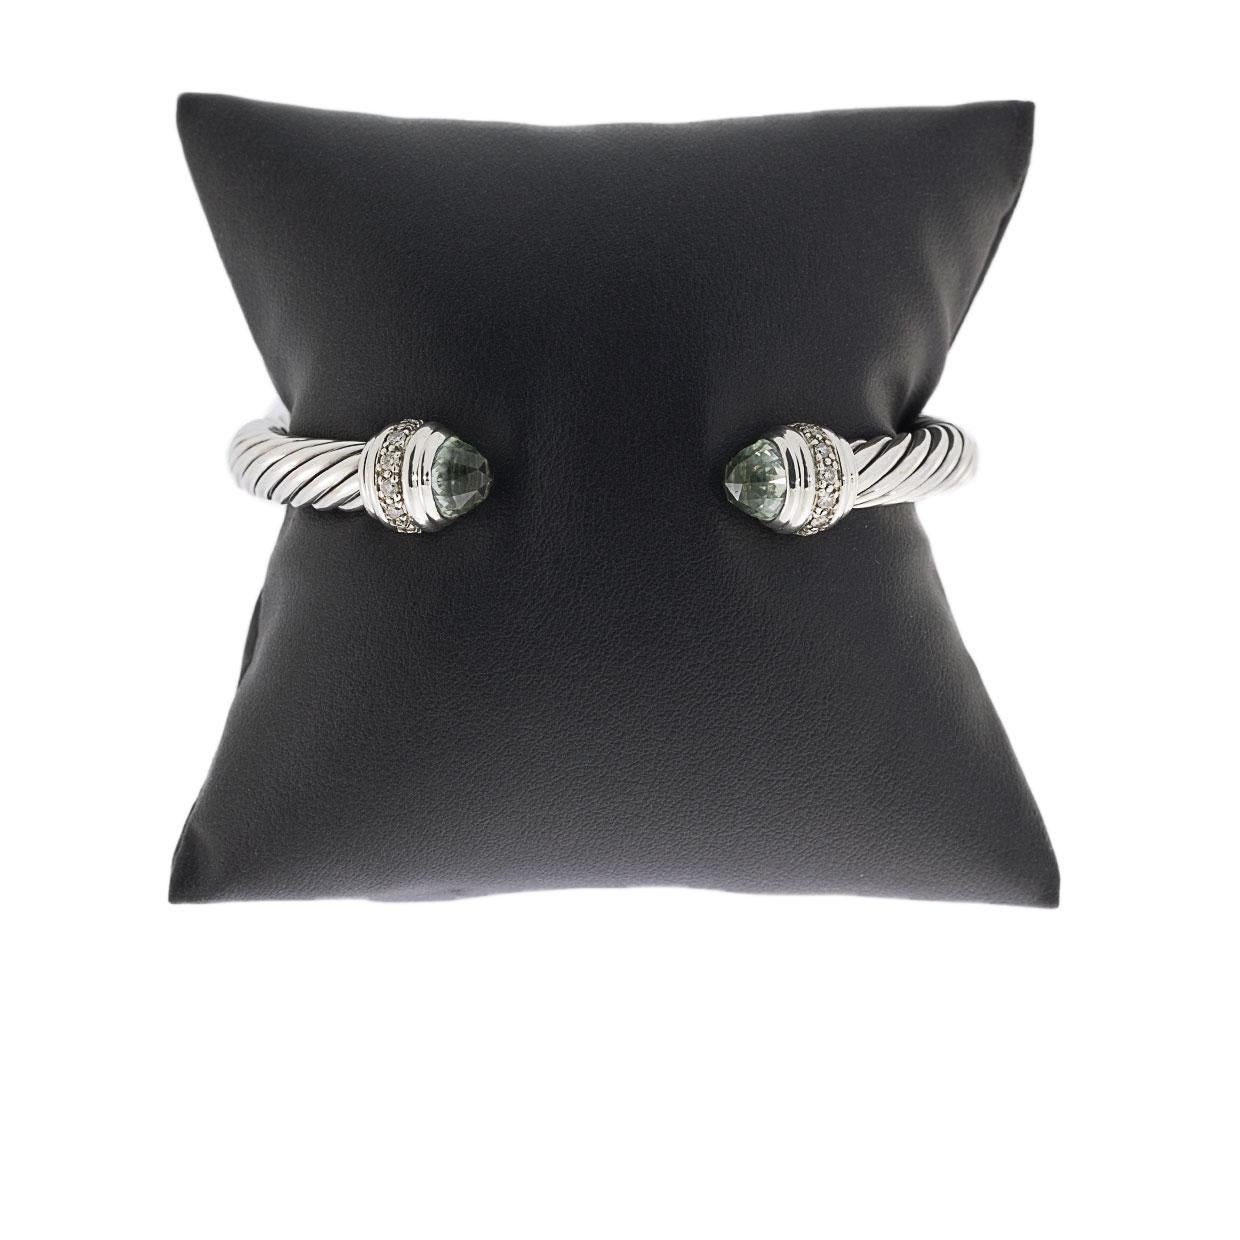 Item Details:
Estimated Retail - $1,825.00
Brand - David Yurman
Metal - 925 Sterling Silver
Total Carat Weight (TCW) - 0.48 ctw (Diamonds only)
Style - Cuff Bracelet
Width - 7.00 mm
Colored Stone Color - Green

Stone 1 Information:
Stone Type -